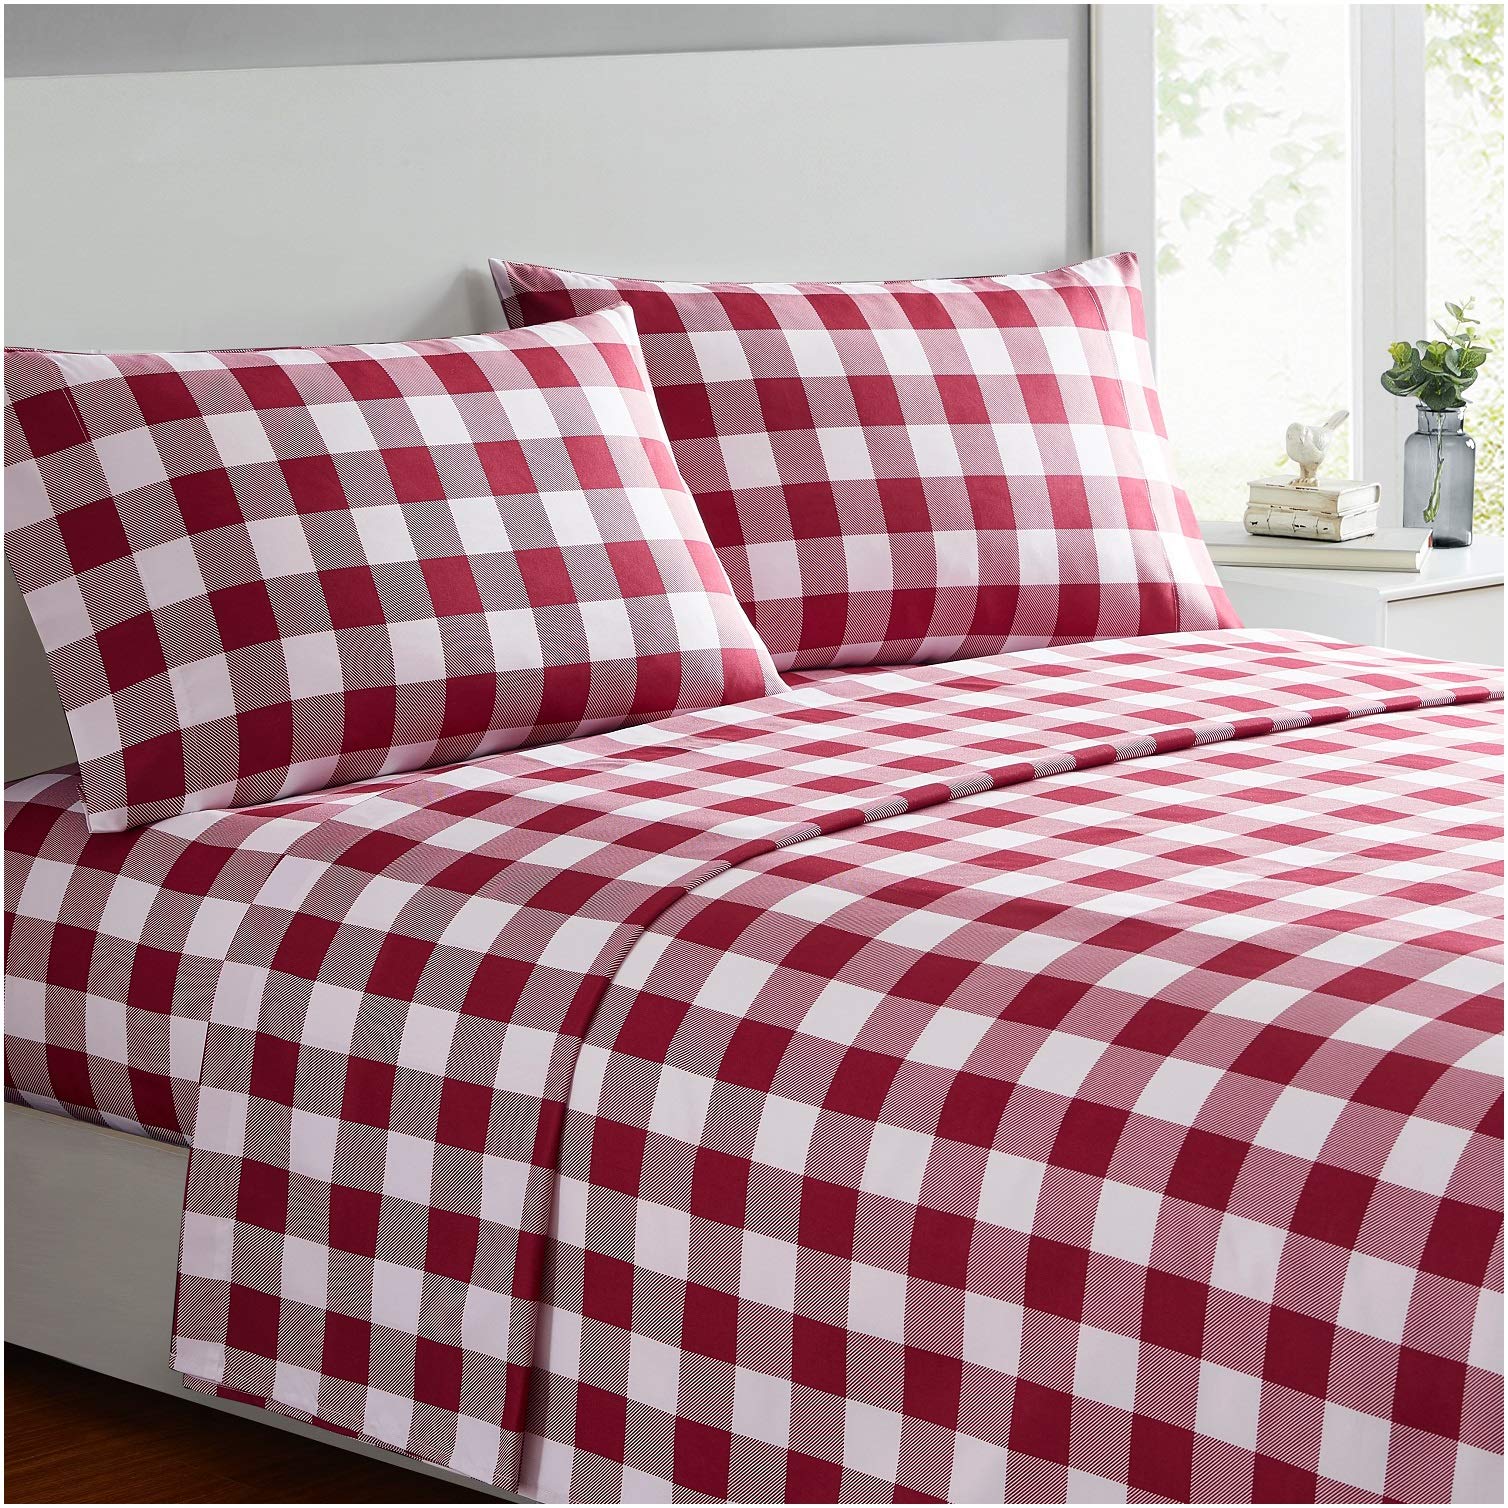 Book Cover Mellanni Twin Sheet Set - Kids Bedding Set for Girls and Boys - Hotel Luxury 1800 Bedding Sheets & Pillowcases - Extra Soft Cooling Bed Sheets - Wrinkle, Fade, Stain Resistant - 3 Piece (Twin, Red)